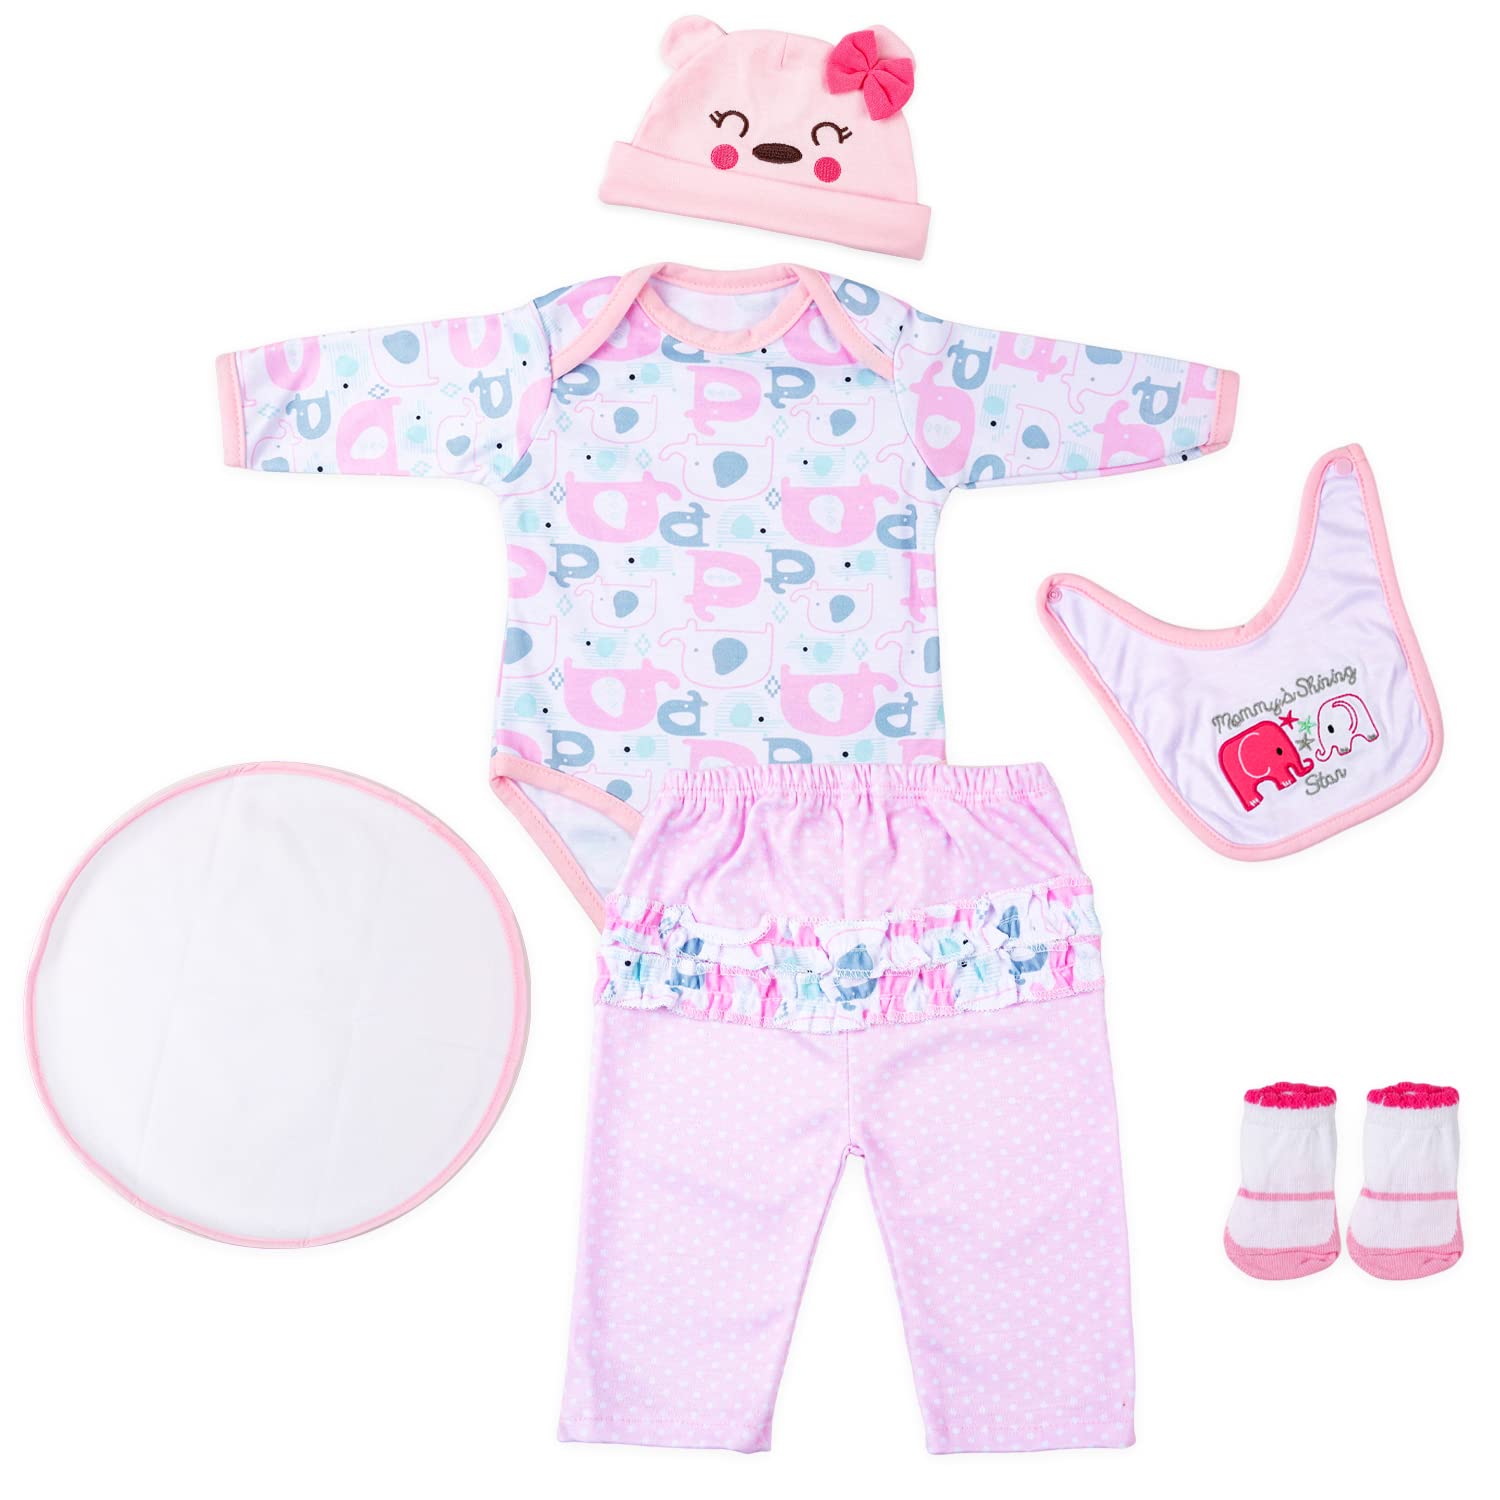 CARANOVO Reborn Baby Doll Clothes 22 inch Pink Elephant 6pcs Outfit Accessories Set for 18-22 Inch Reborn Doll